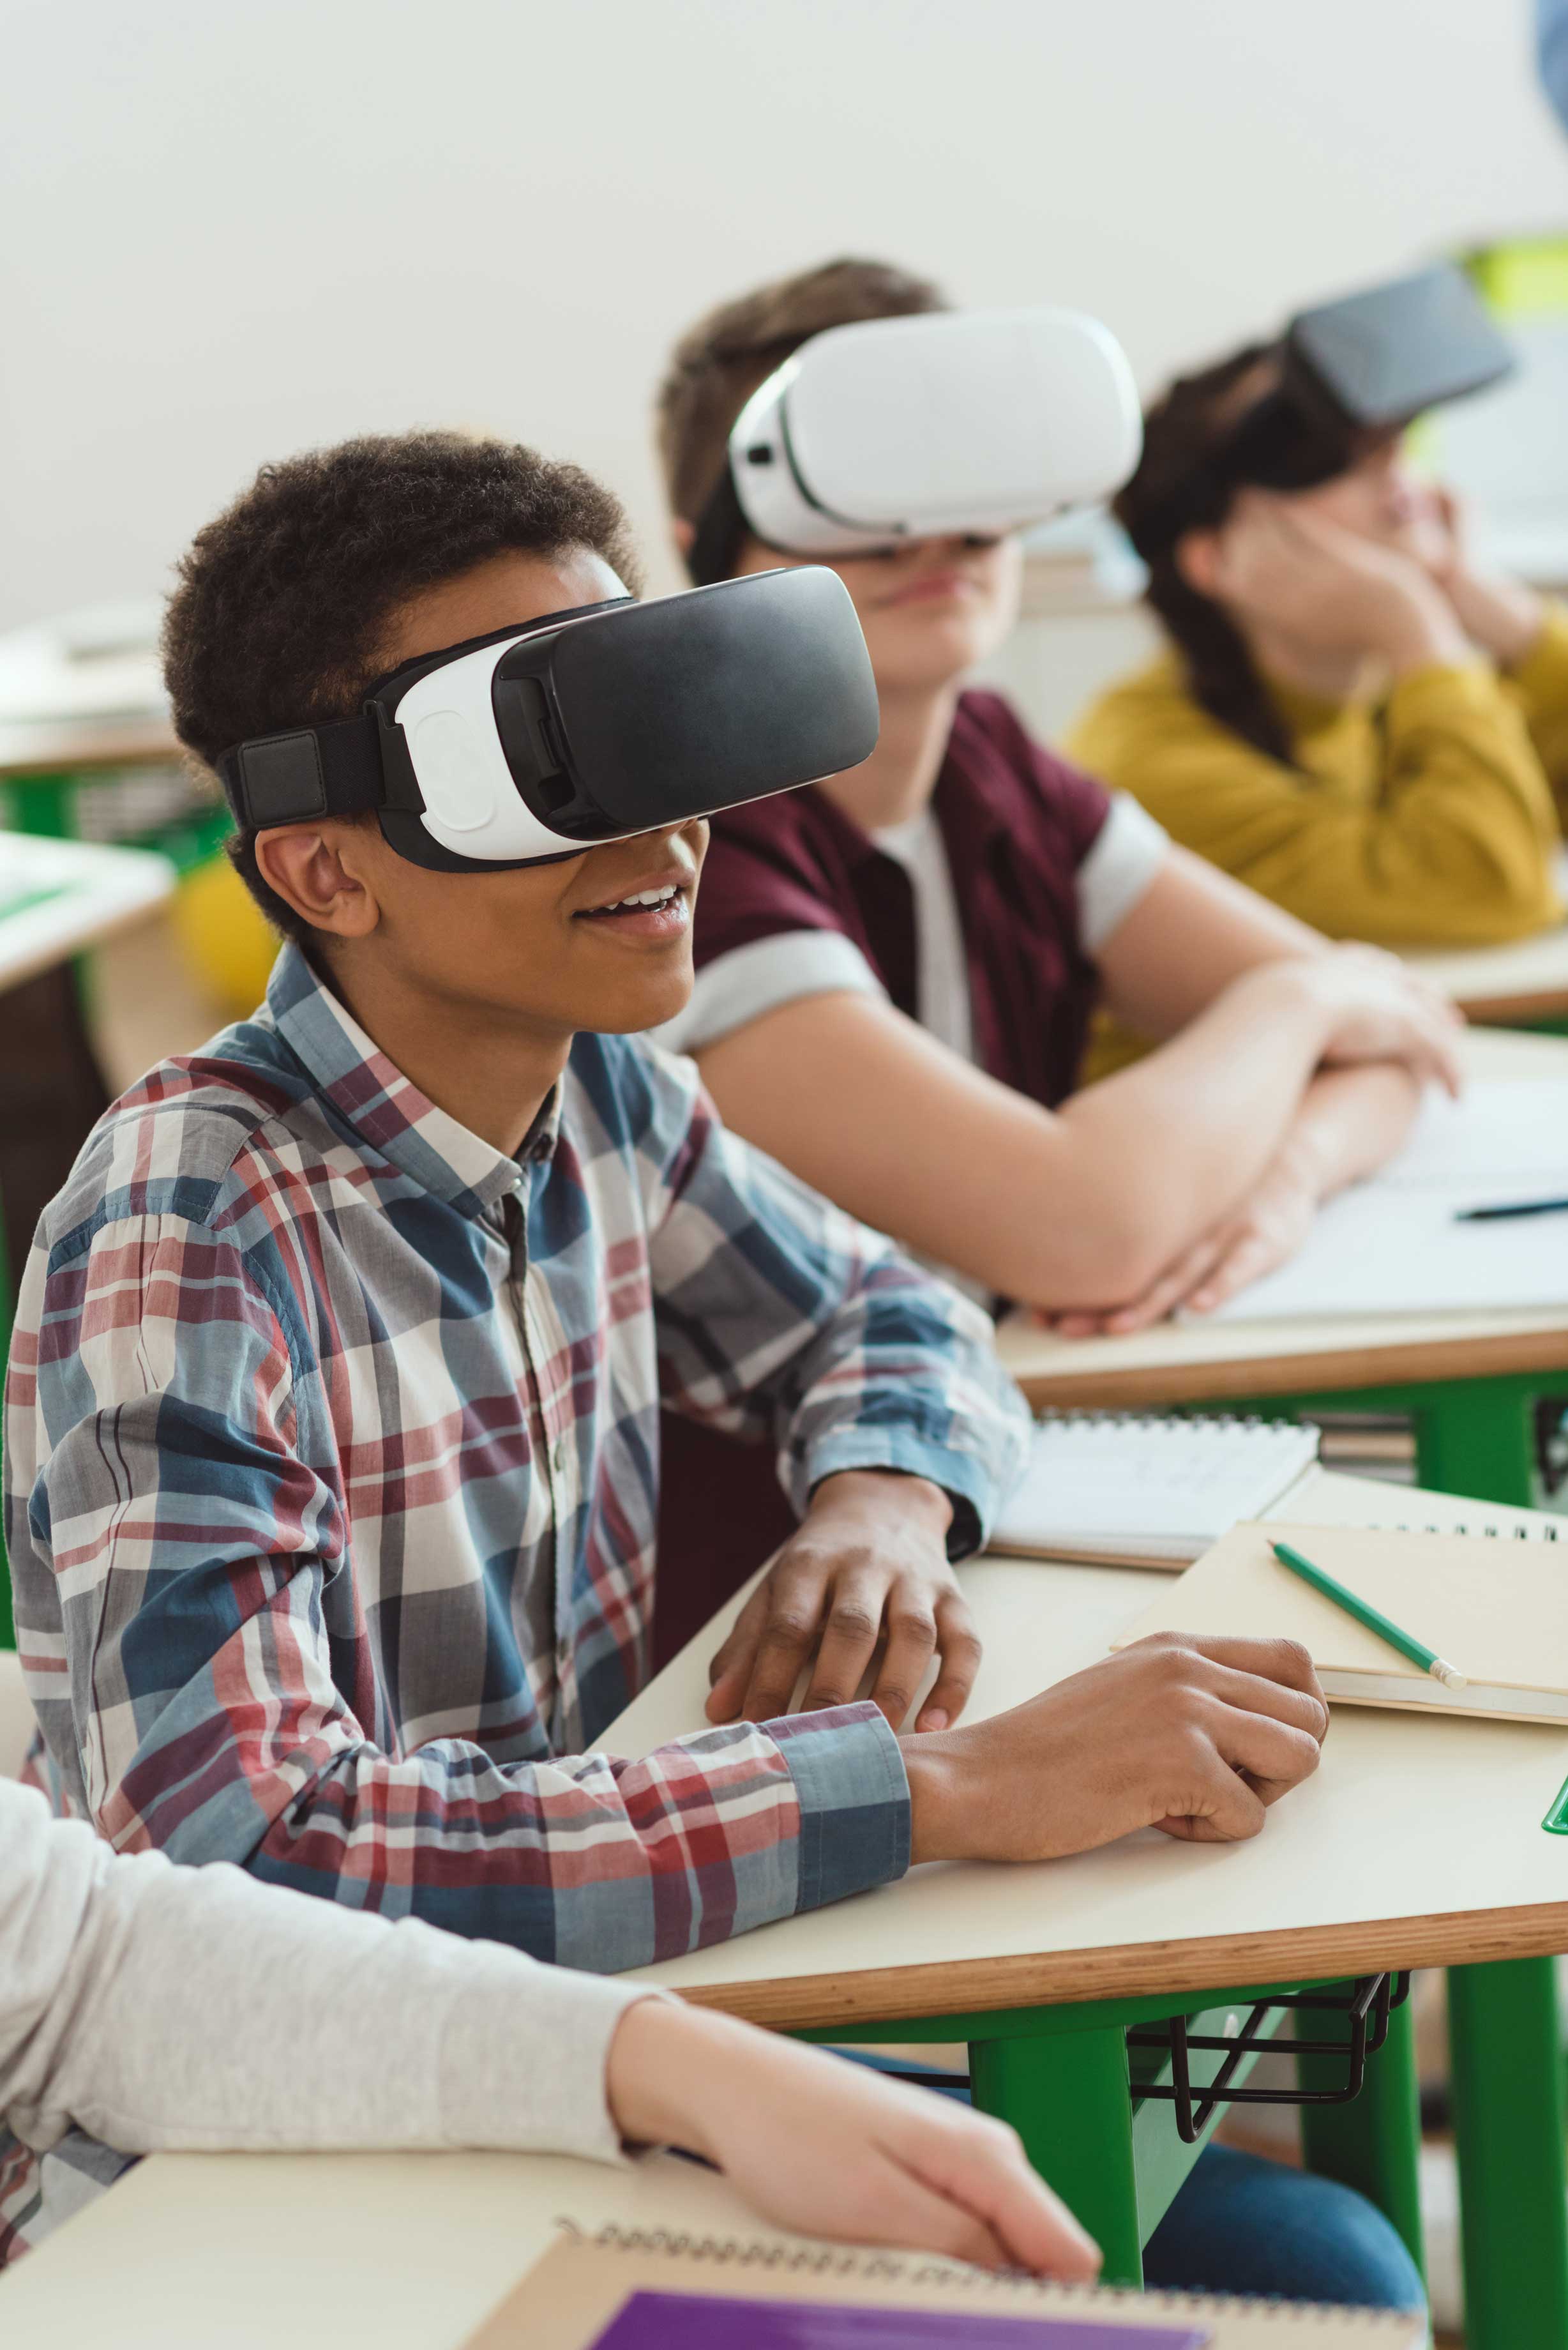 articles about vr in education